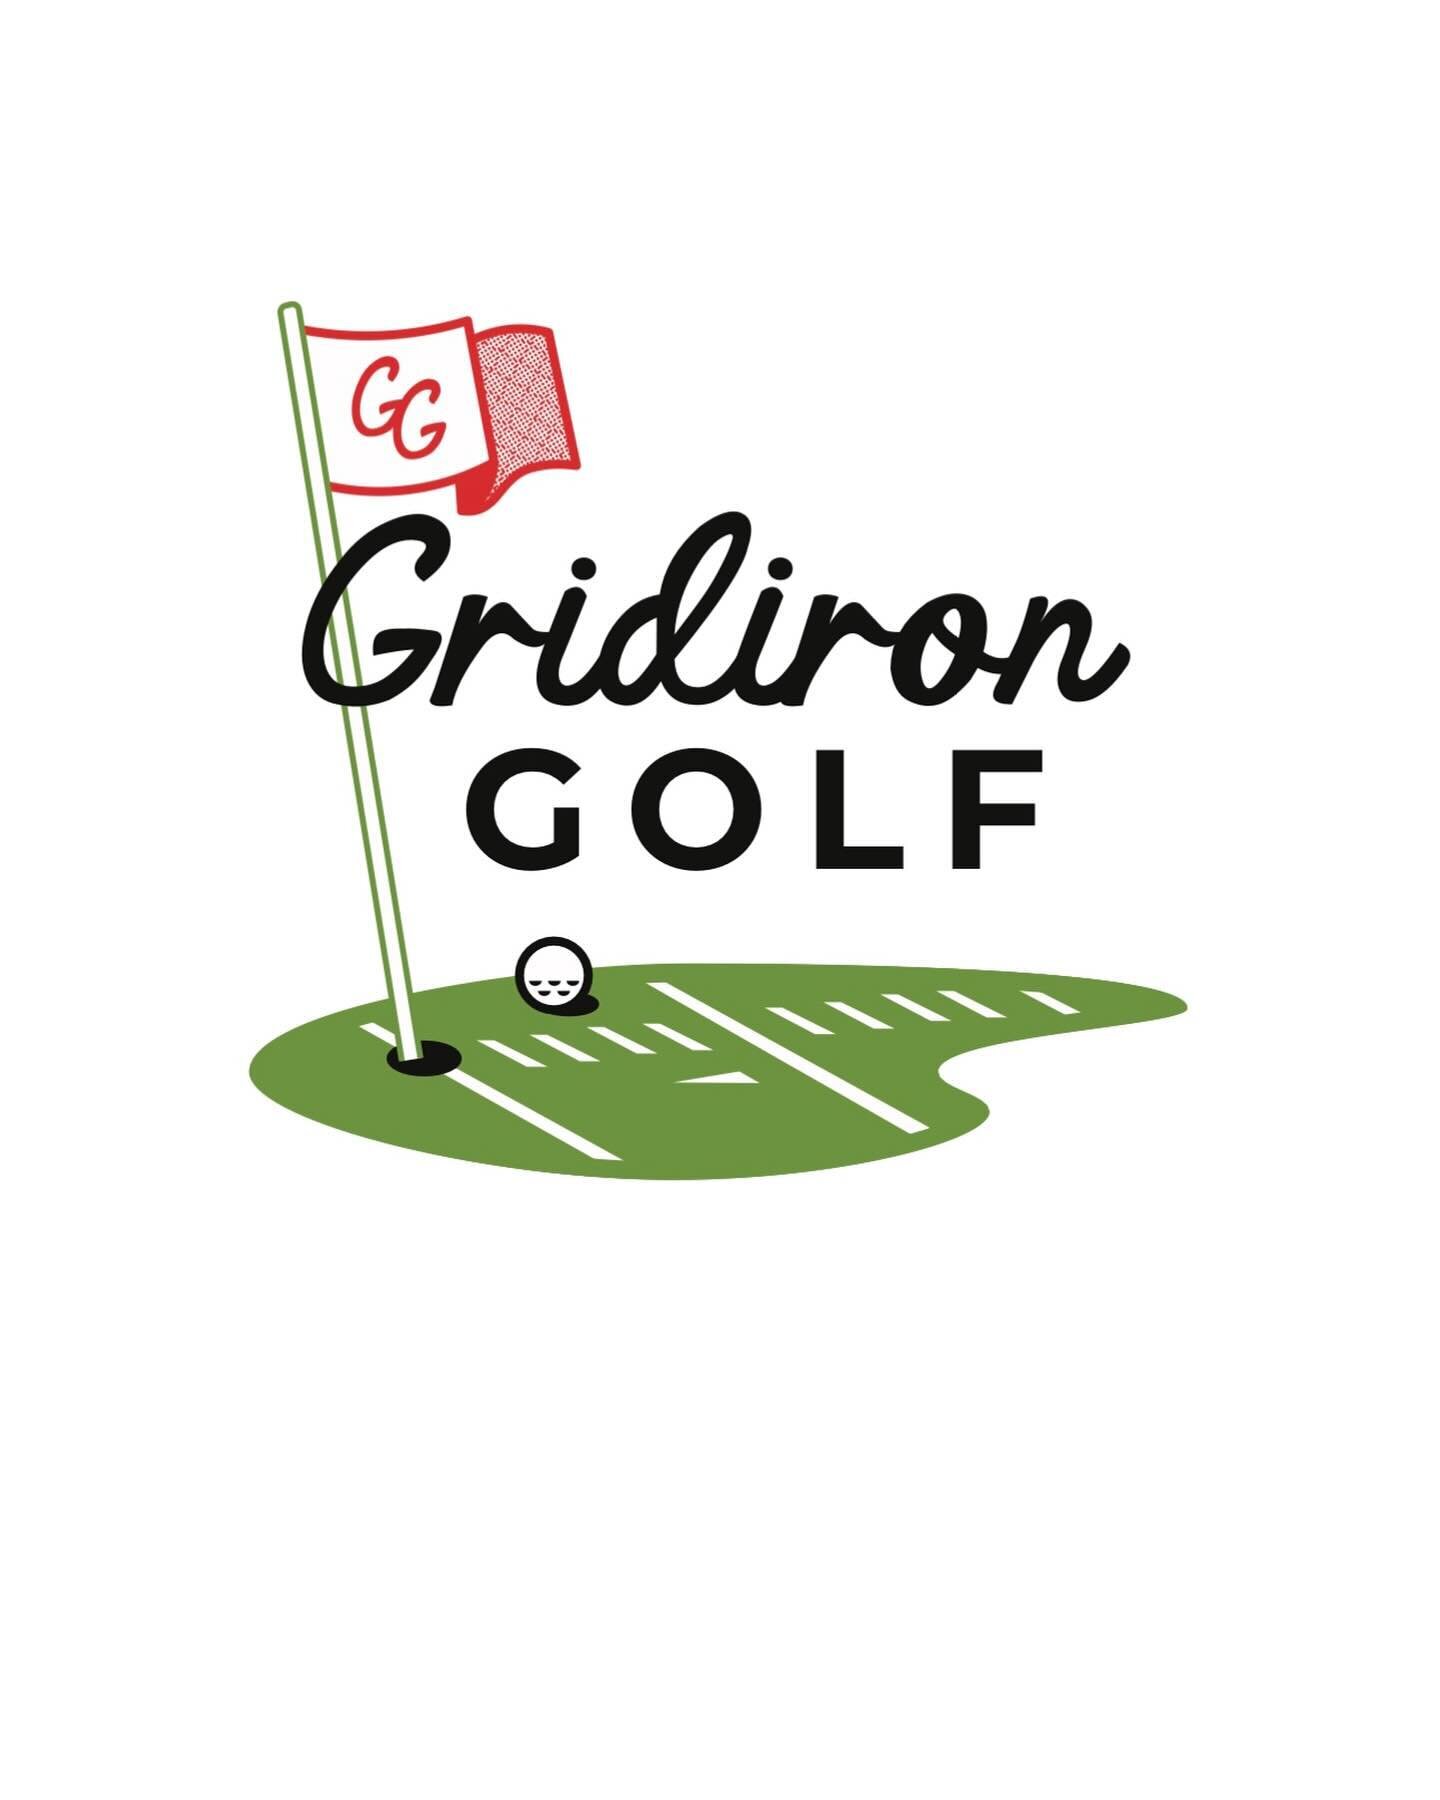 GIVEAWAY TIME!!! Gridiron Golf is giving away ONE game ahead of #mastersweek, just in time, so you have a game to play while watching The Masters!

To Enter:

1- Follow @gridirongolf_game 
2- Like this post
3- Tag Three Friends below who would round 